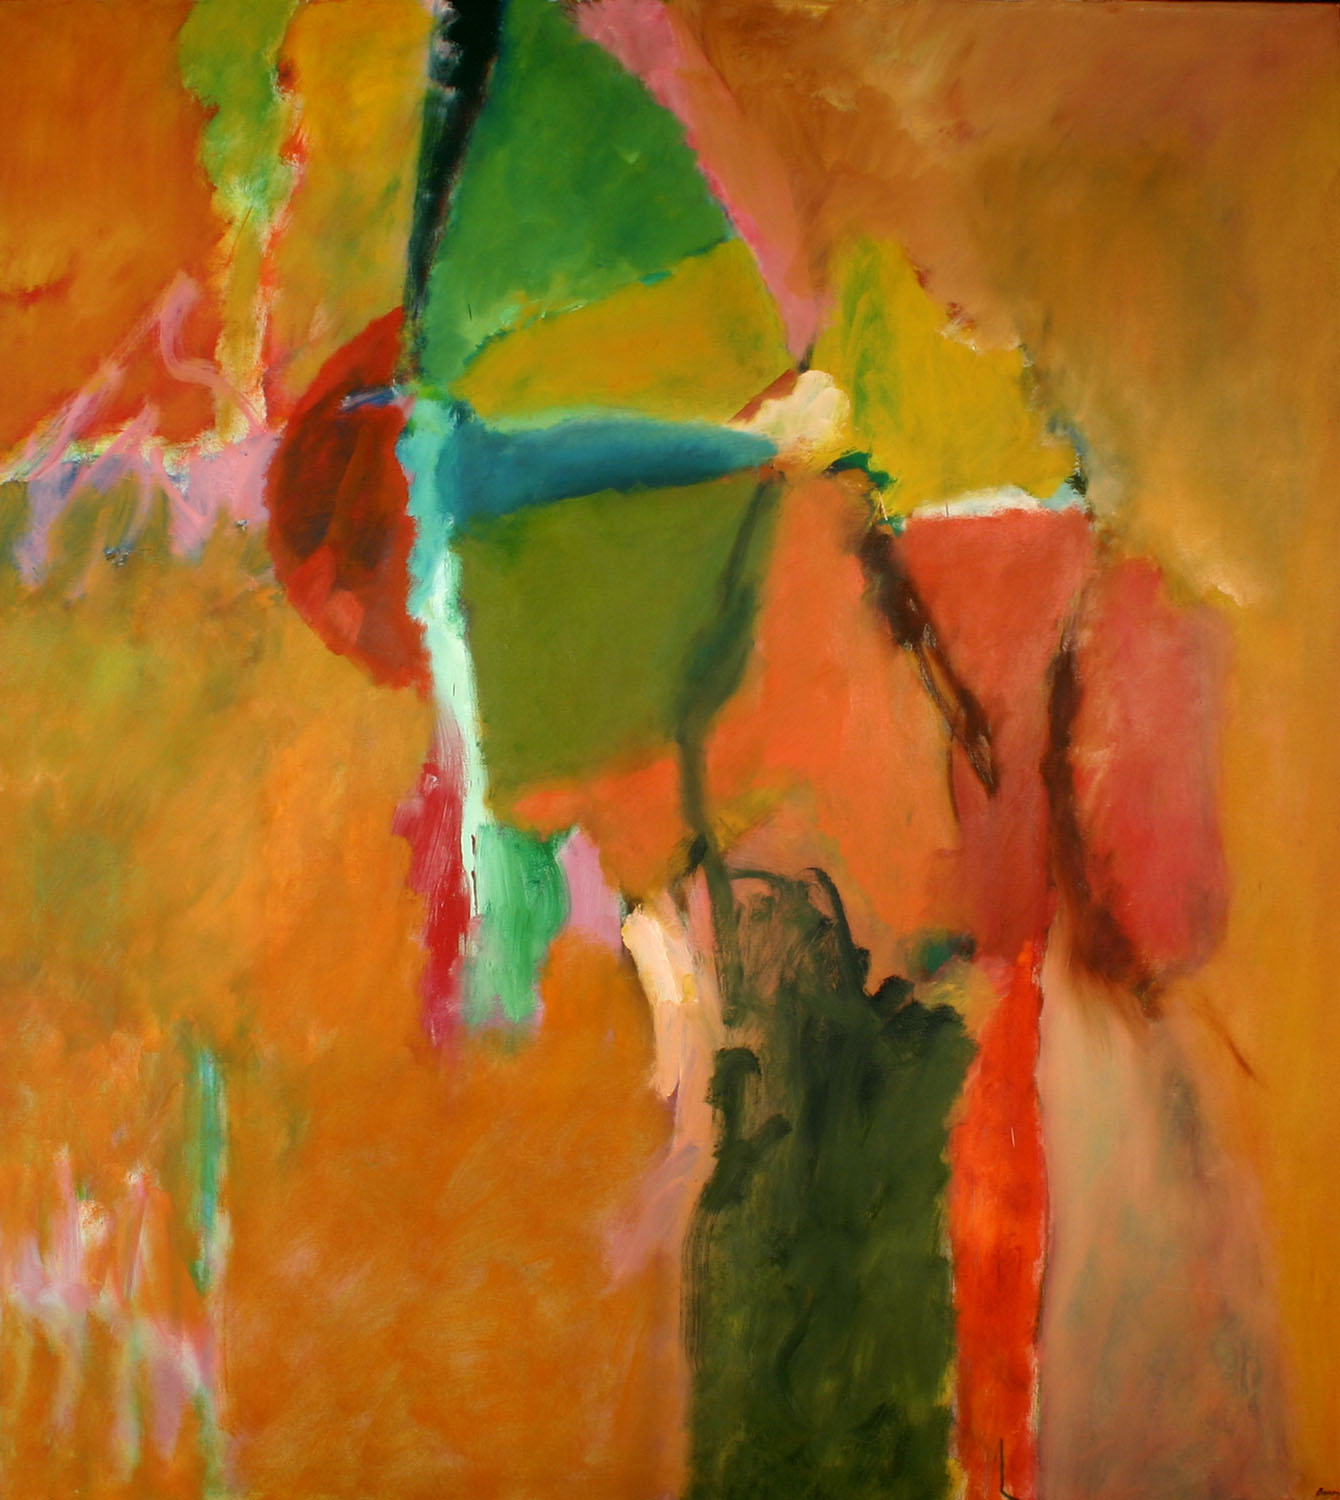 Morris Barazani, Earth Moods, 1968–69. Oil on Canvas. Collection of the DePaul Art Museum, Gift of the artist, 2005.27